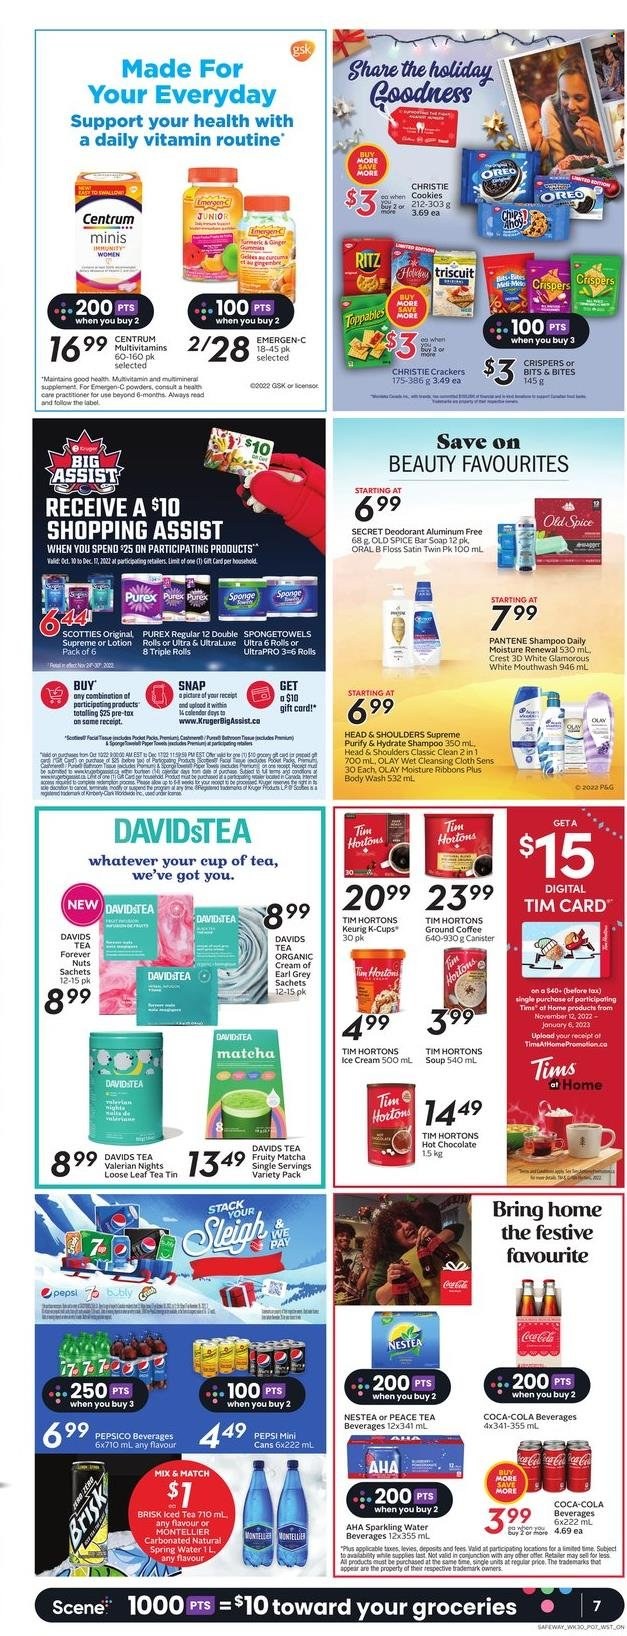 thumbnail - Safeway Flyer - November 24, 2022 - November 30, 2022 - Sales products - soup, ice cream, cookies, crackers, RITZ, chips, spice, Coca-Cola, Pepsi, ice tea, spring water, sparkling water, hot chocolate, matcha, coffee, ground coffee, coffee capsules, K-Cups, Keurig, bath tissue, Purex, body wash, soap bar, soap, mouthwash, Crest, Olay, body lotion, anti-perspirant, pot, multivitamin, Emergen-C, Centrum, shampoo, Head & Shoulders, Pantene, Old Spice, Oreo, Oral-B, deodorant. Page 8.